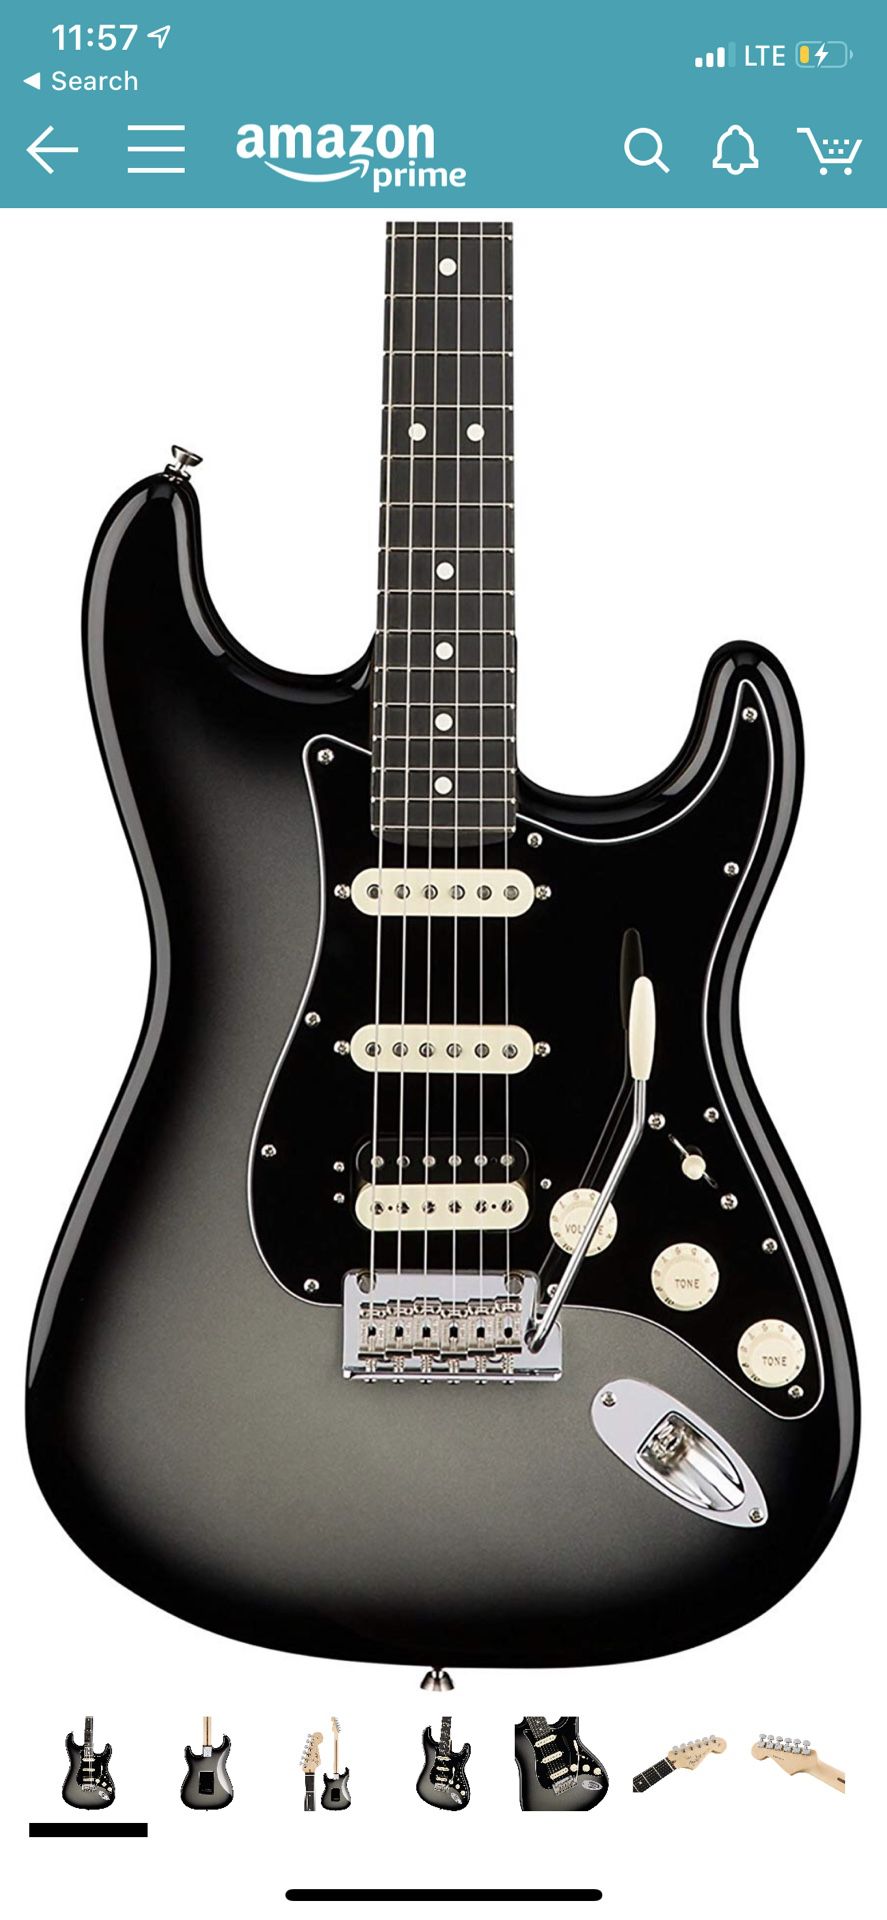 Fender Limited Edition American Stratocaster ($1500 amzn)